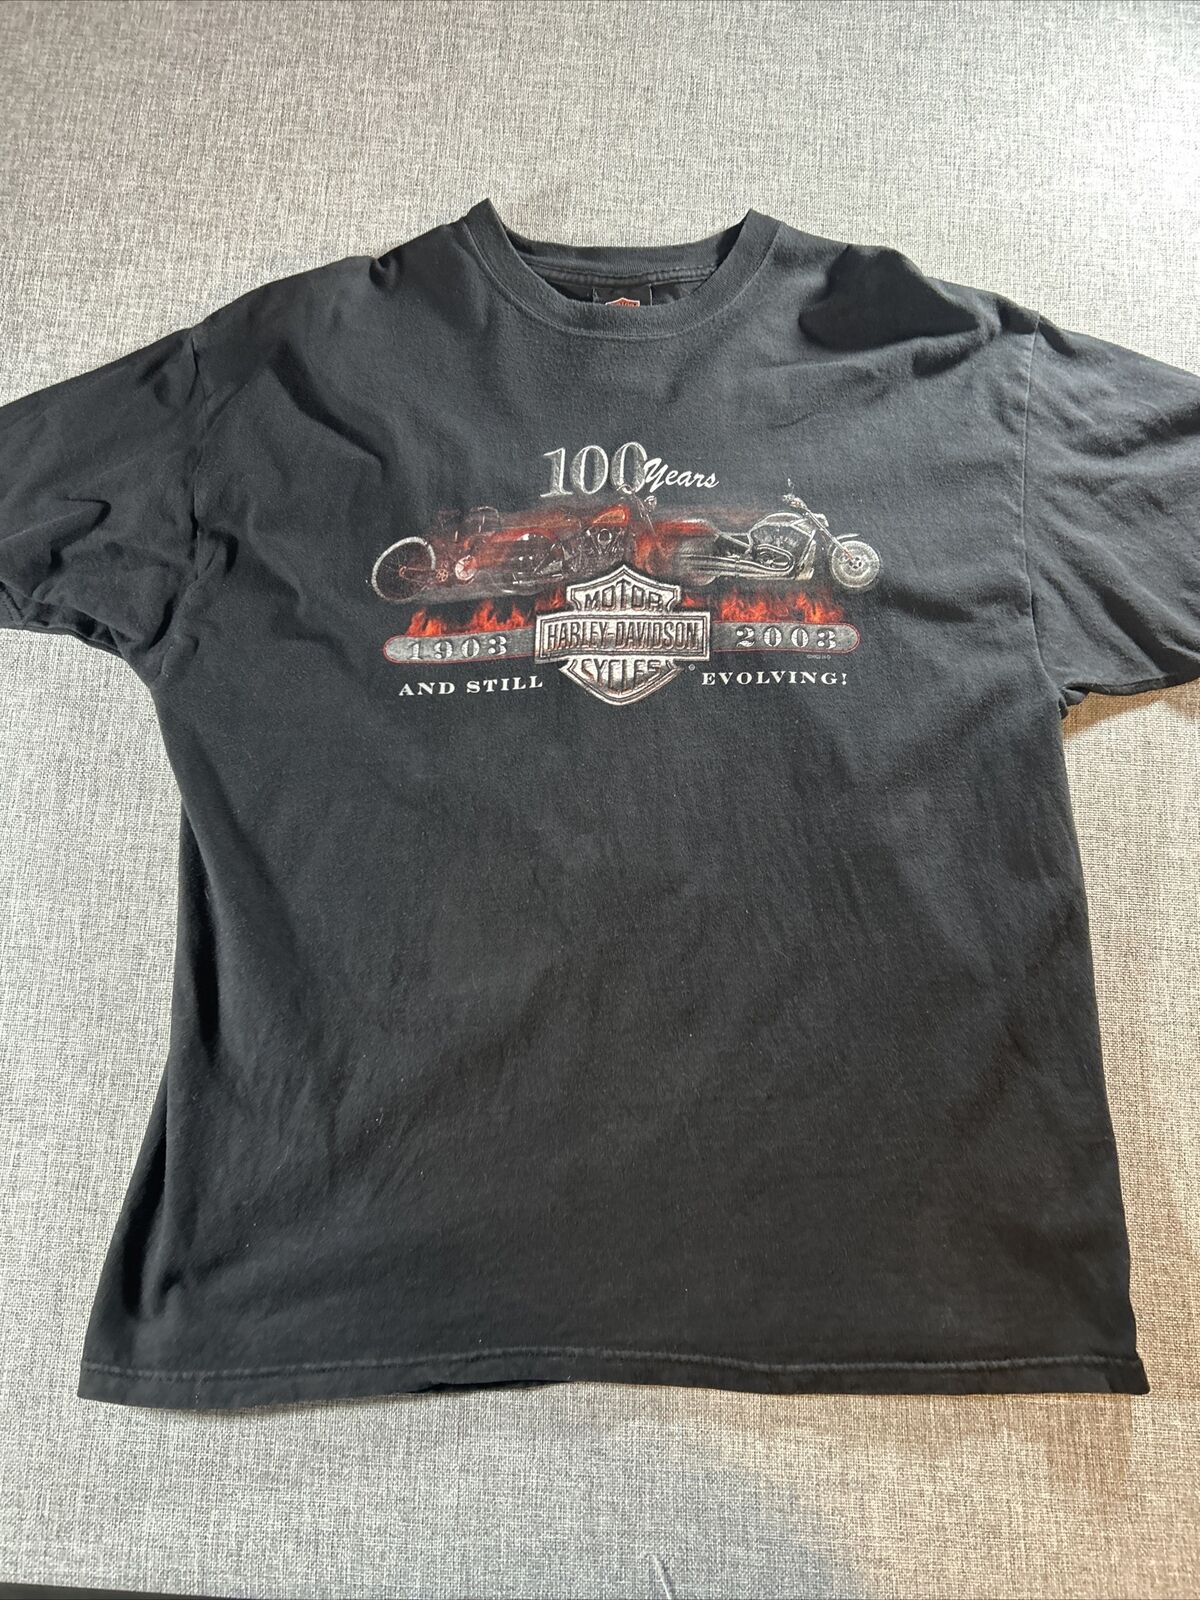 Vintage Harley Davidson Motorcycles Shirt XL Made In USA 100 Years Commemorative